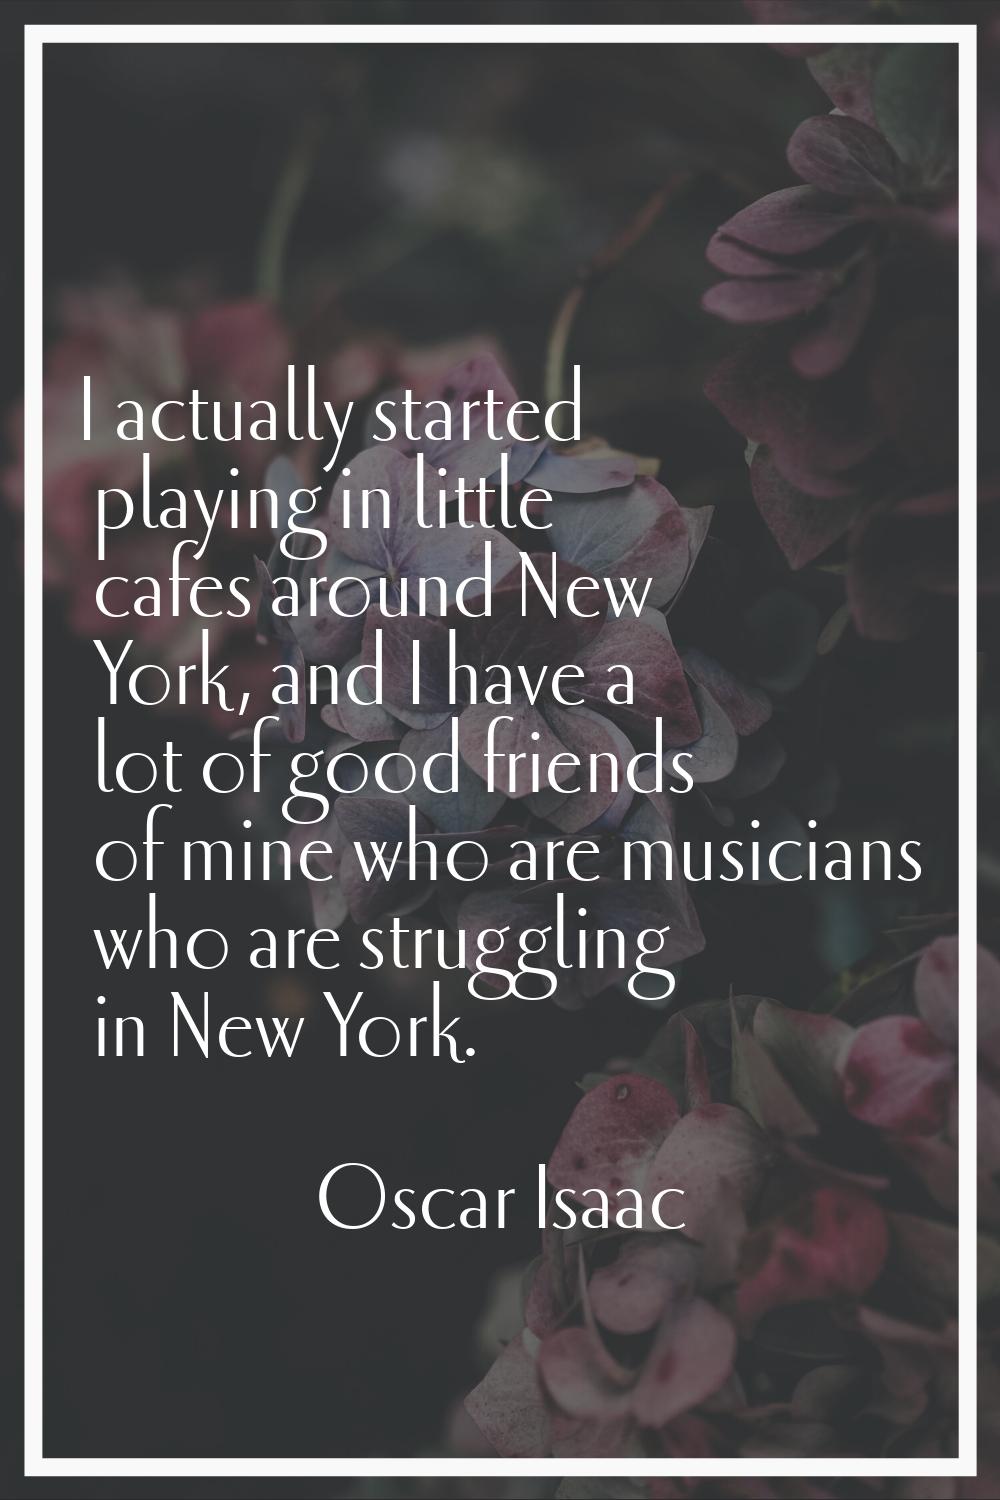 I actually started playing in little cafes around New York, and I have a lot of good friends of min